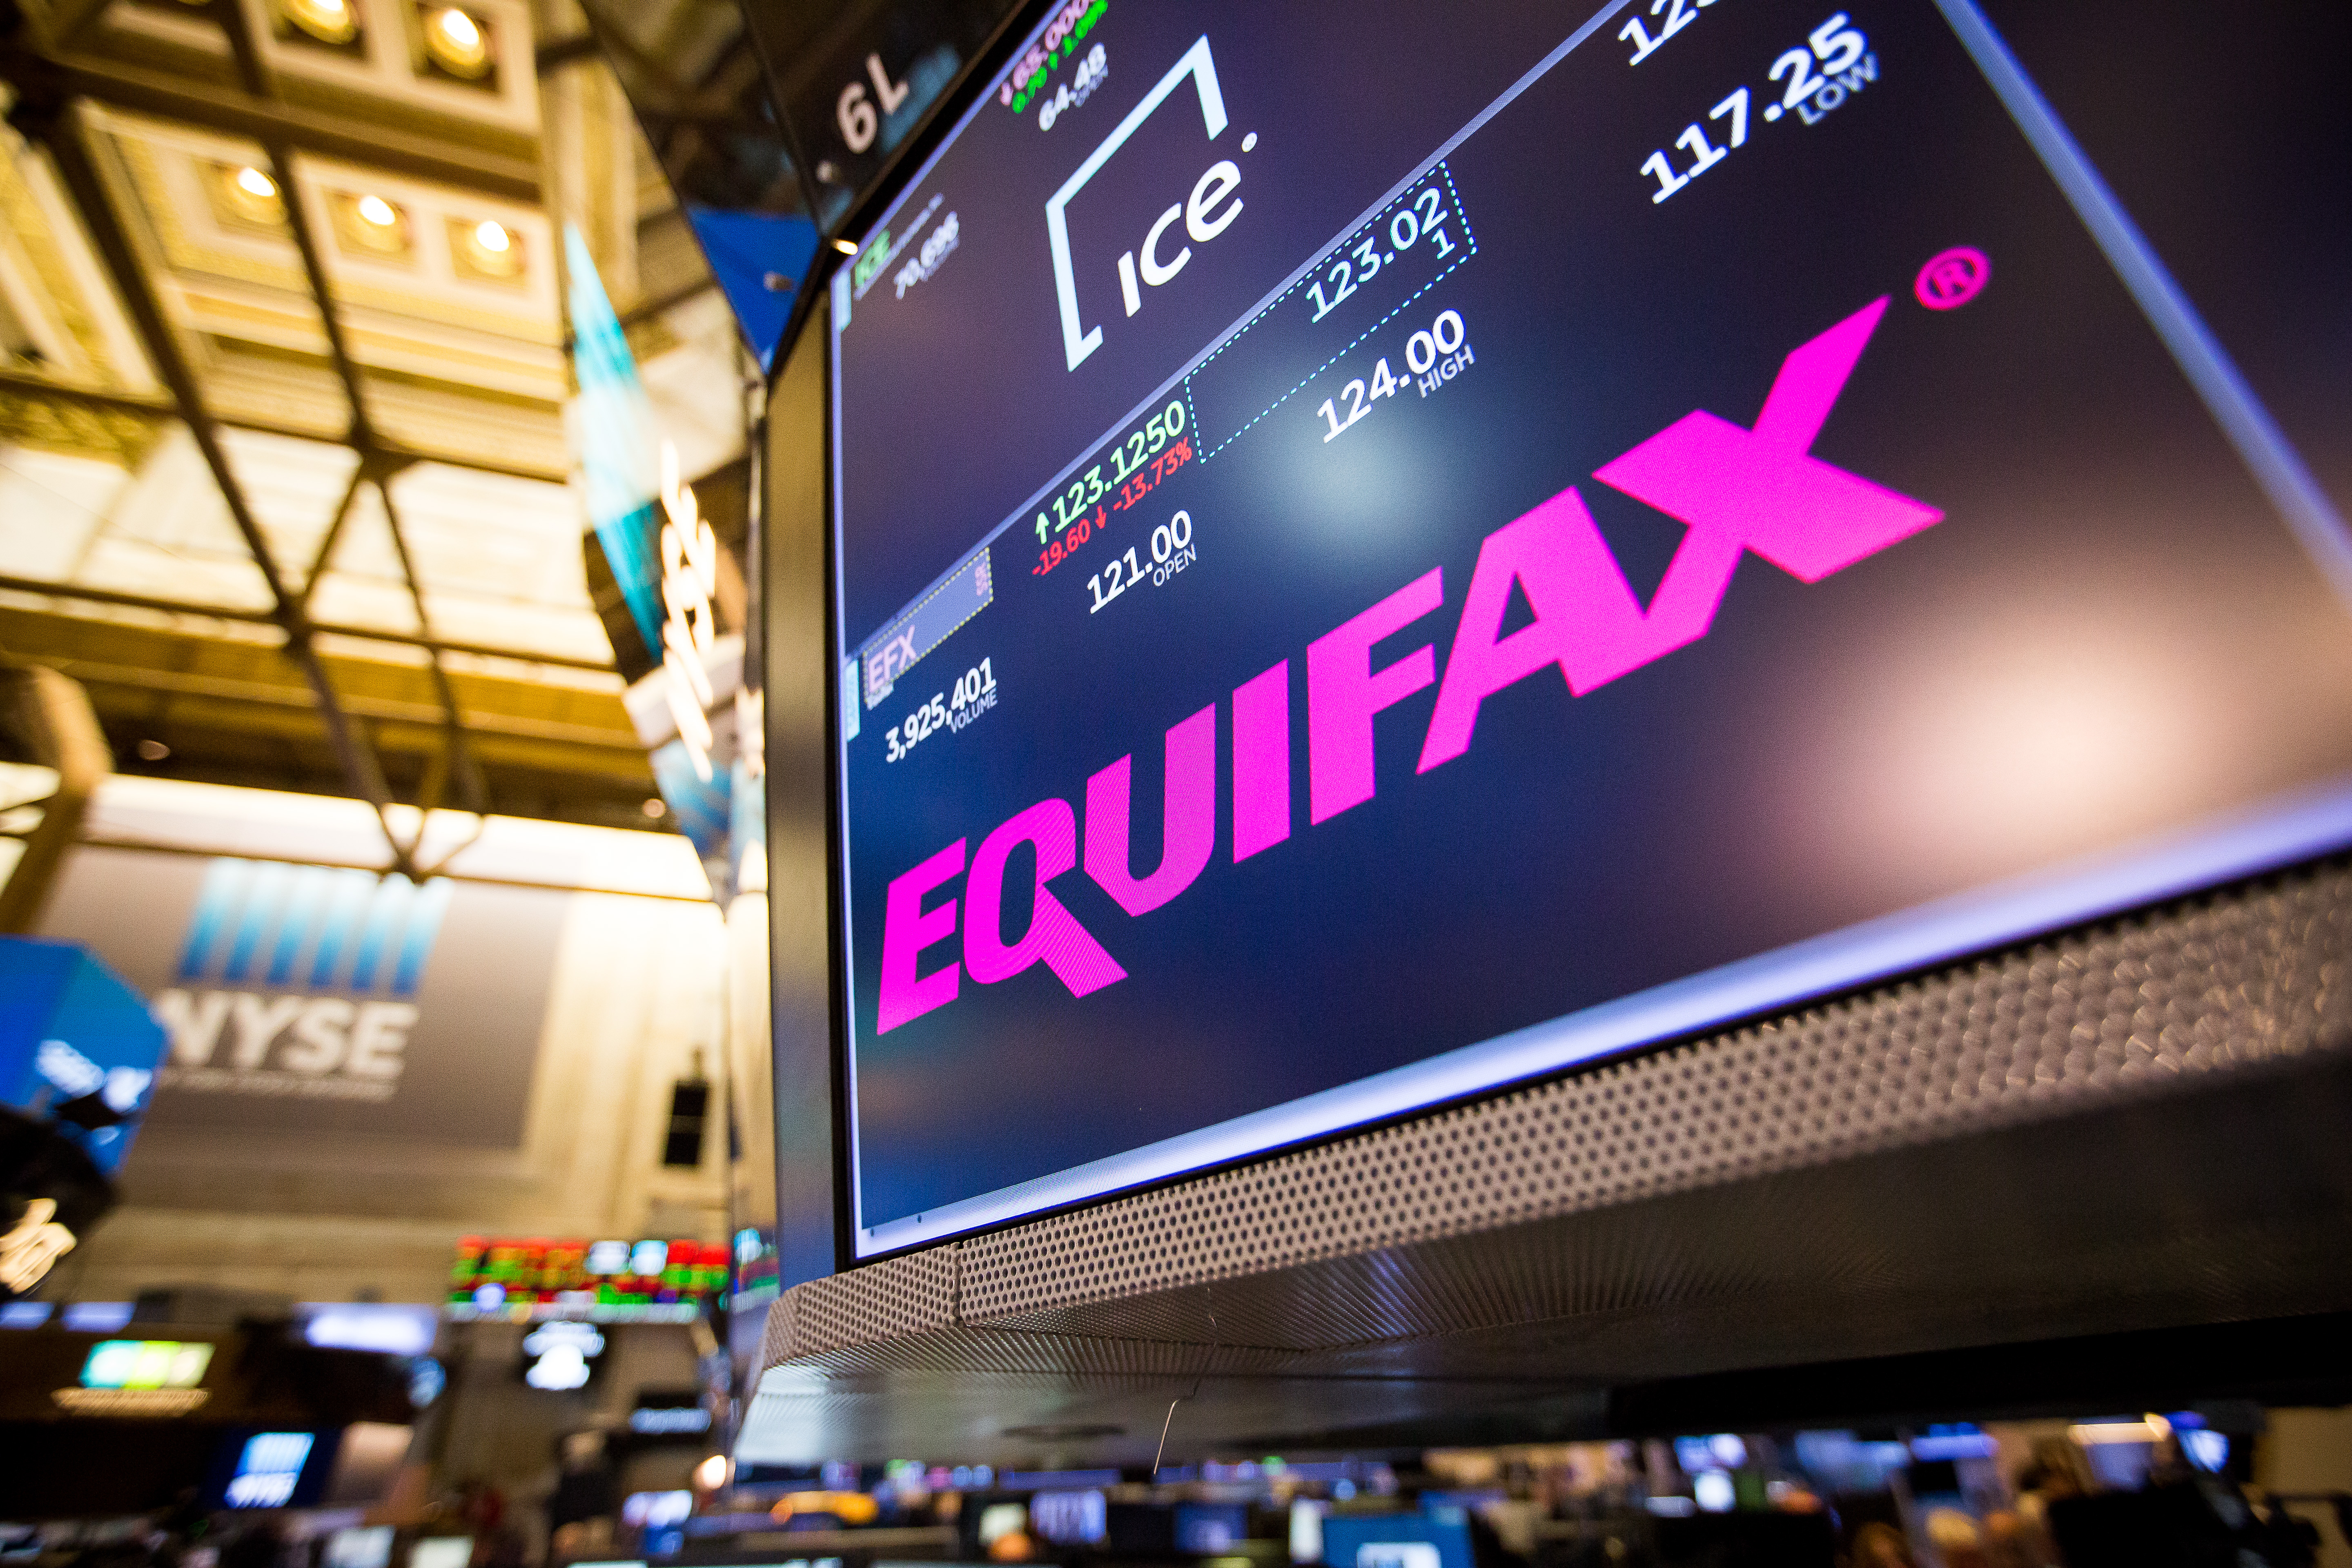 An Equifax Exec Sold $1 Million in Stock Before Hack Was Revealed, Prosecutors Say